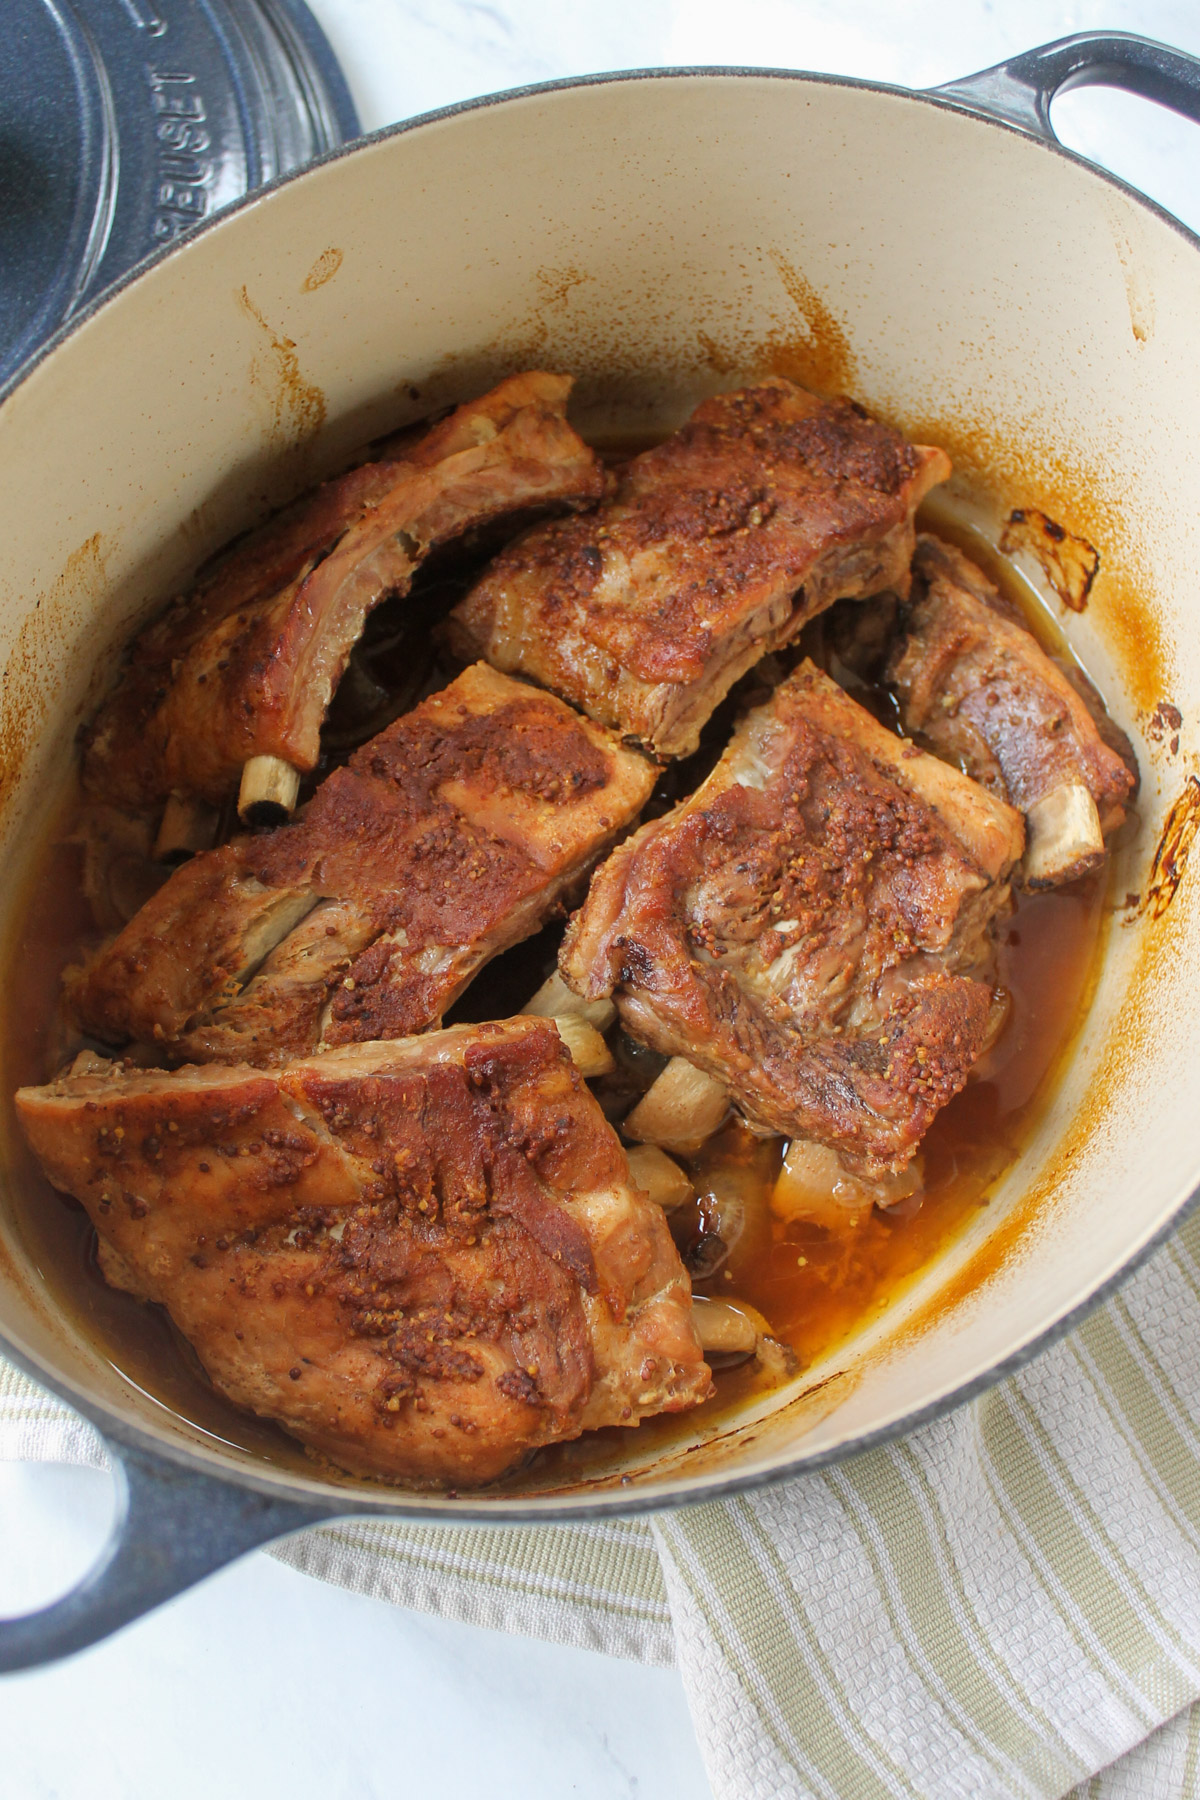 The baked ribs in a Dutch oven.